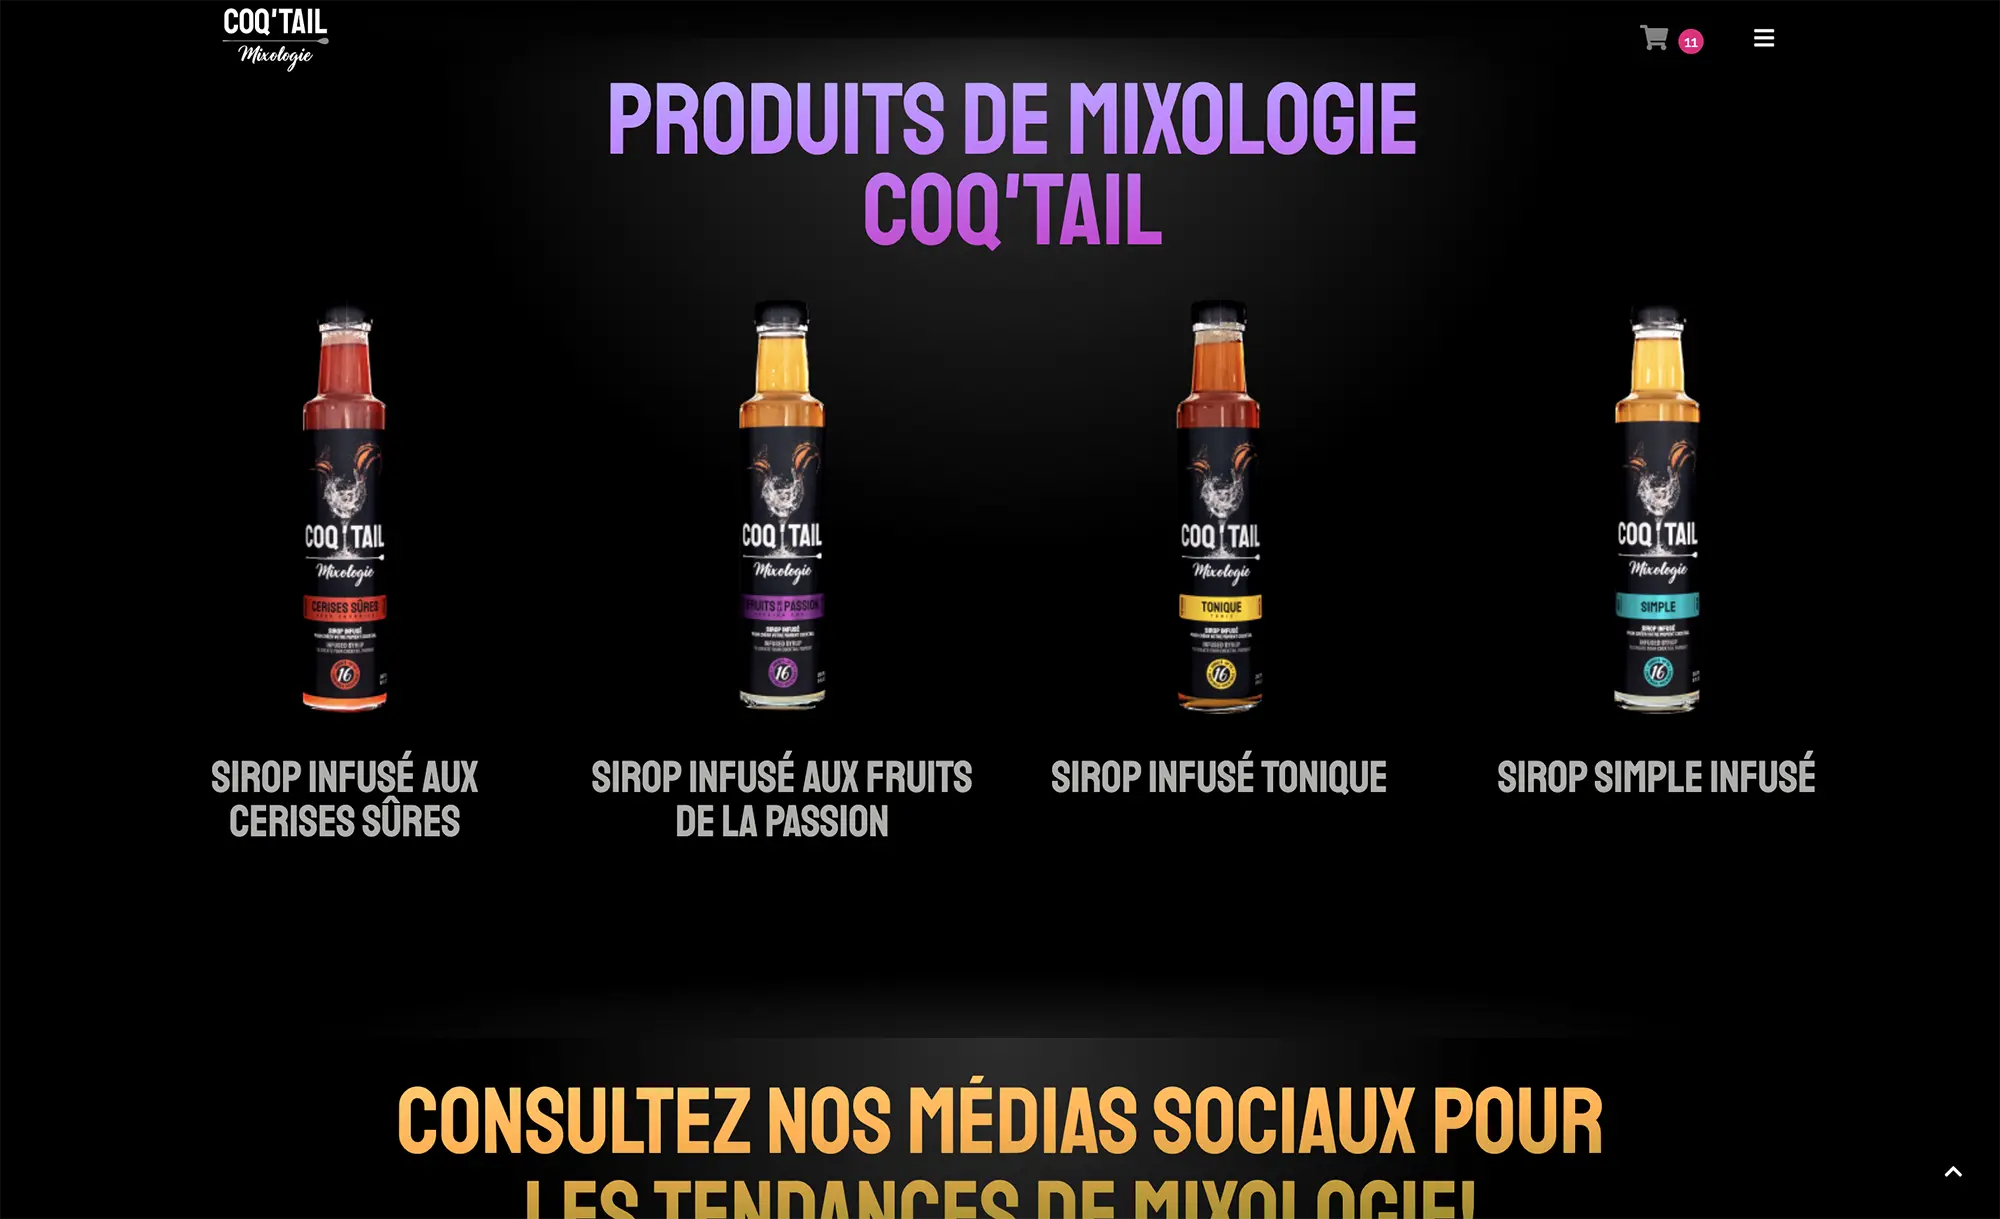 COQTAIL.ca-2021-Products-Showroom-by-KIKdesign.ca